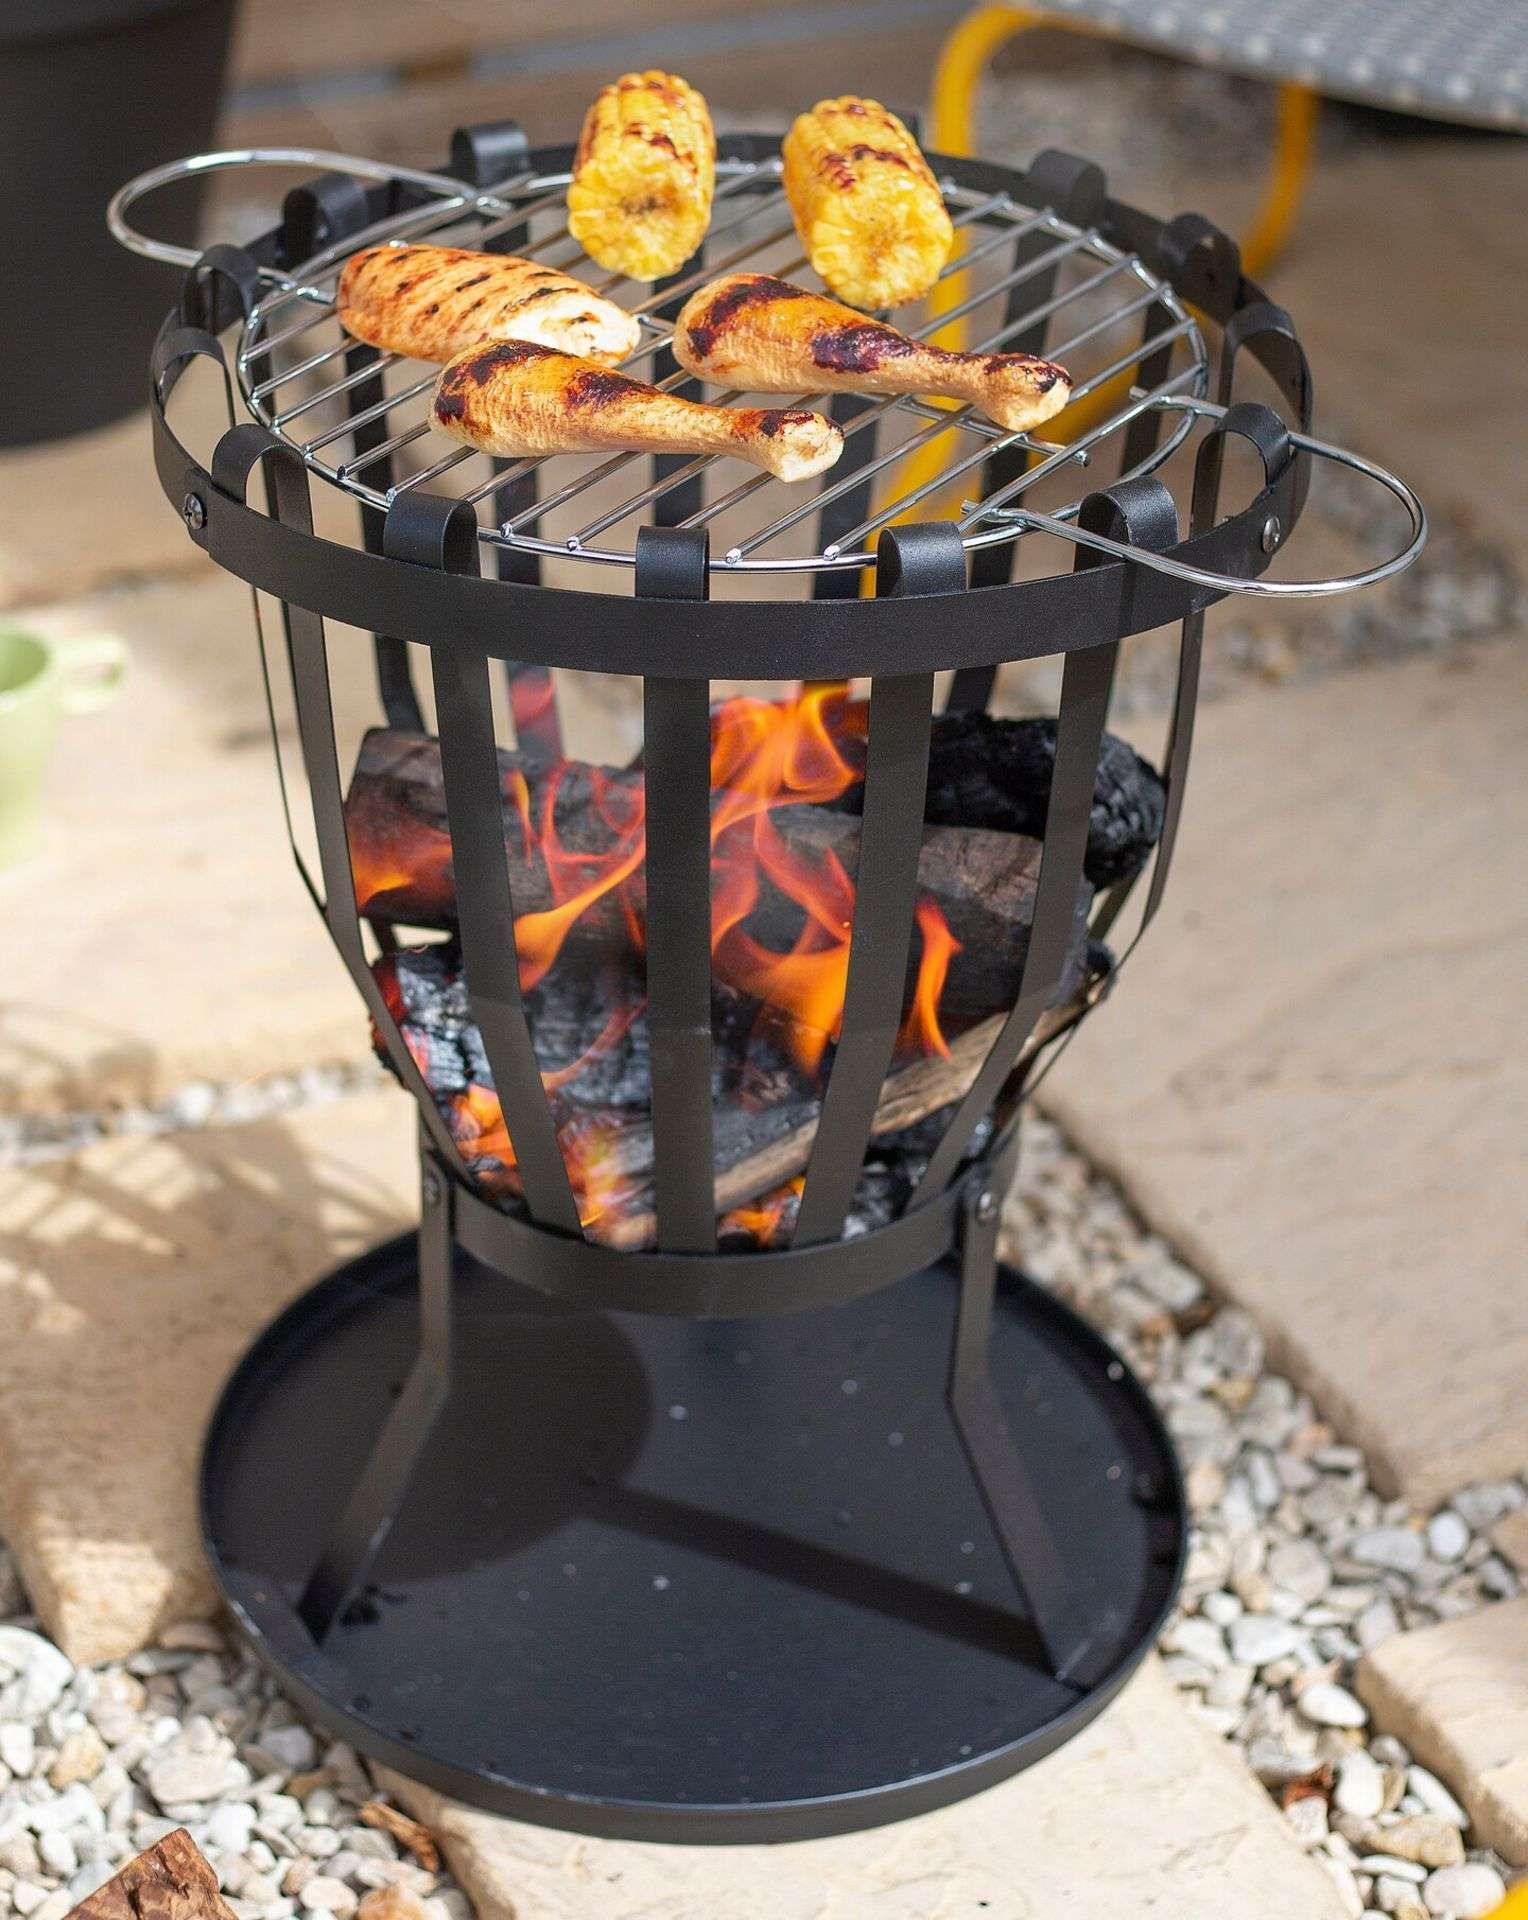 2x NEW & BOXED LA HACIENDA Curitiba Fire Basket with Cooking Grill. RRP £55 EACH. The simple